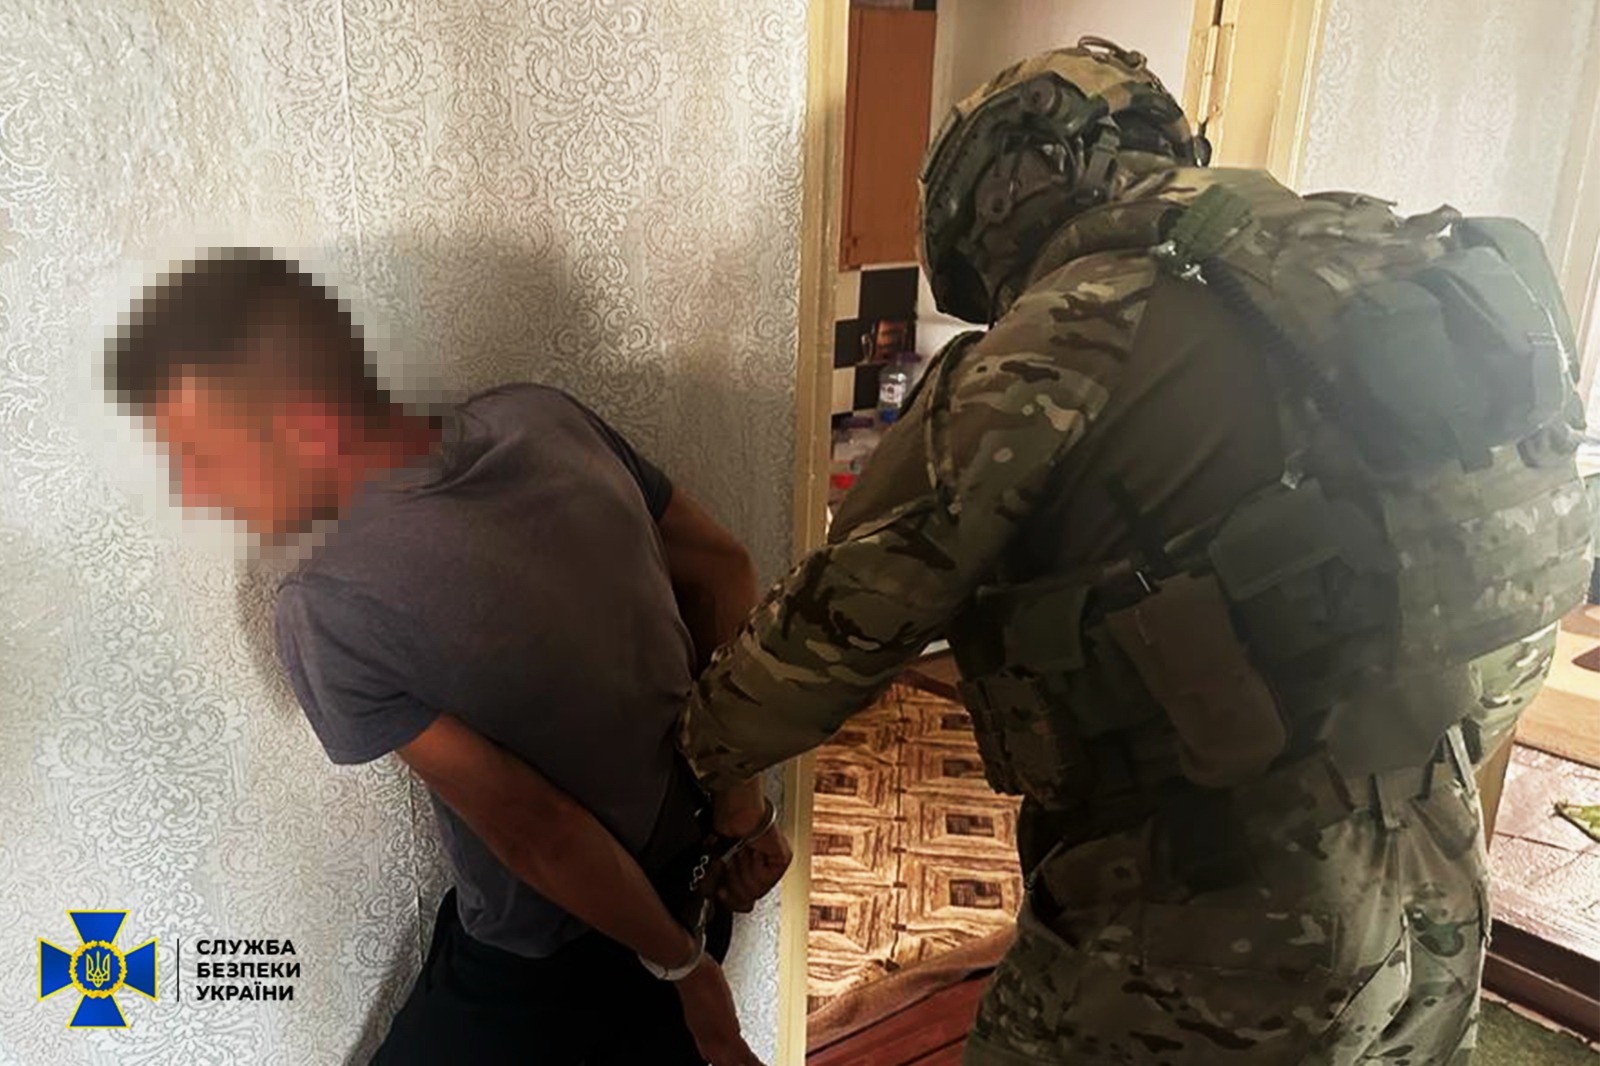 SBU detains another intruder in Cherkasy for demanding share of financial aid from Ukrainian families (Image Courtesy: Faebook)